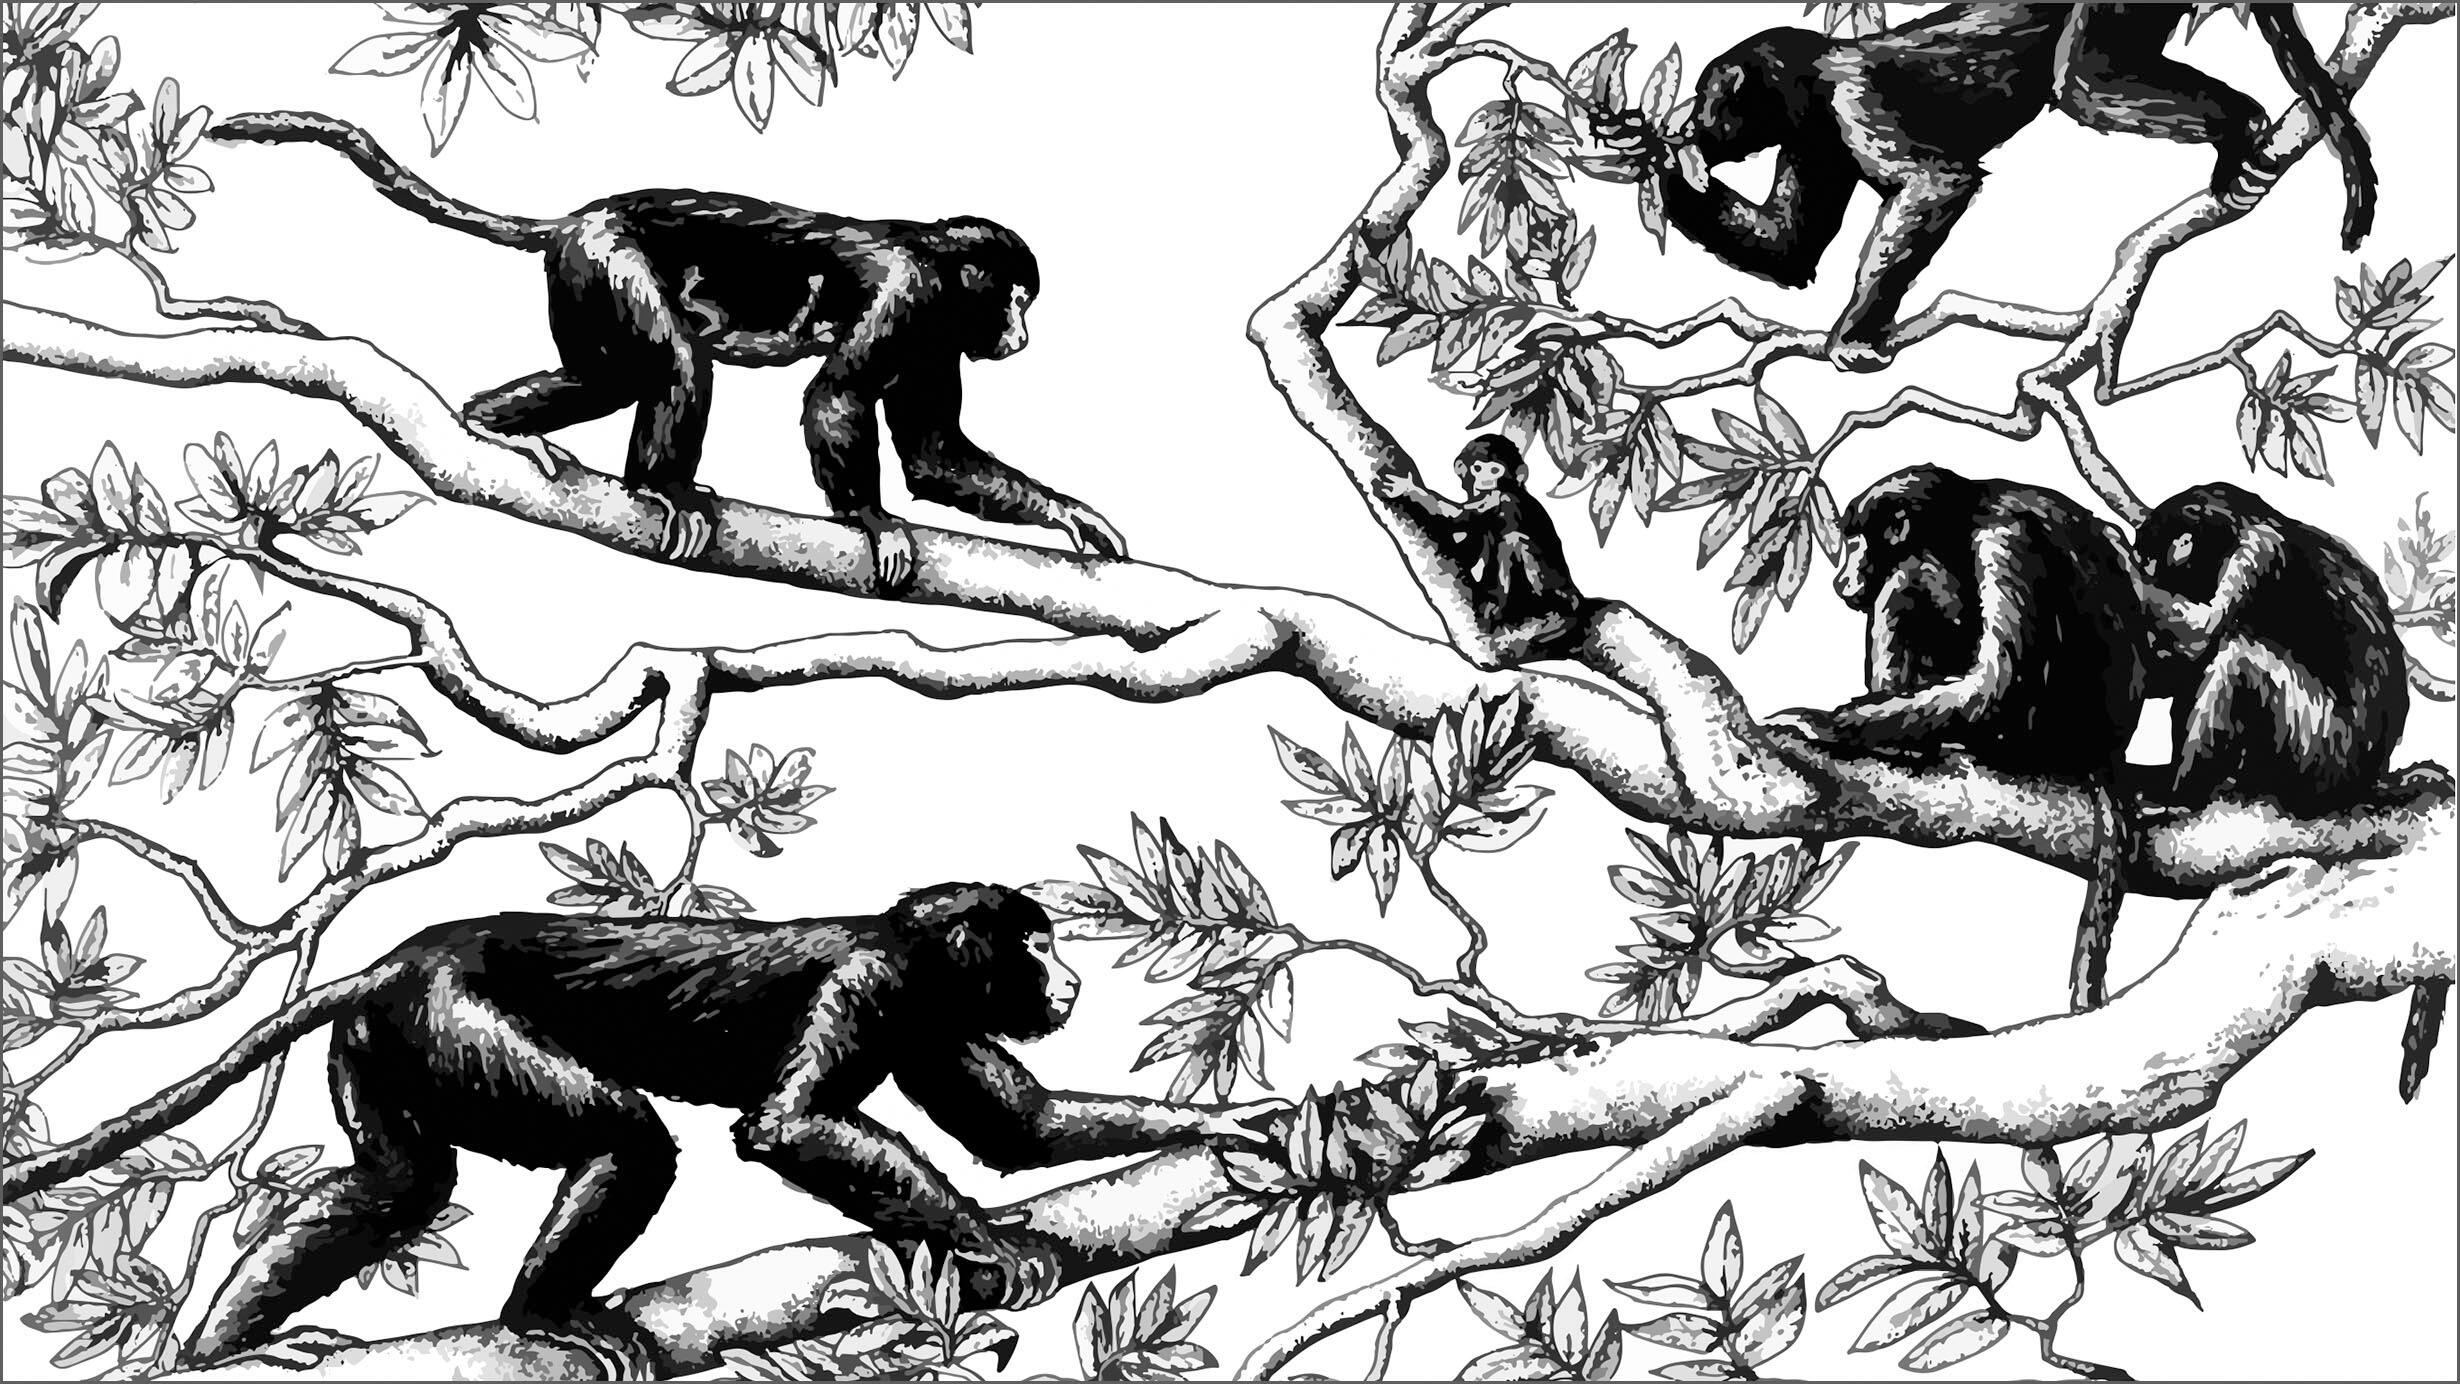 Rendering depicts four adult and one juvenile primate on the branches of a tree.